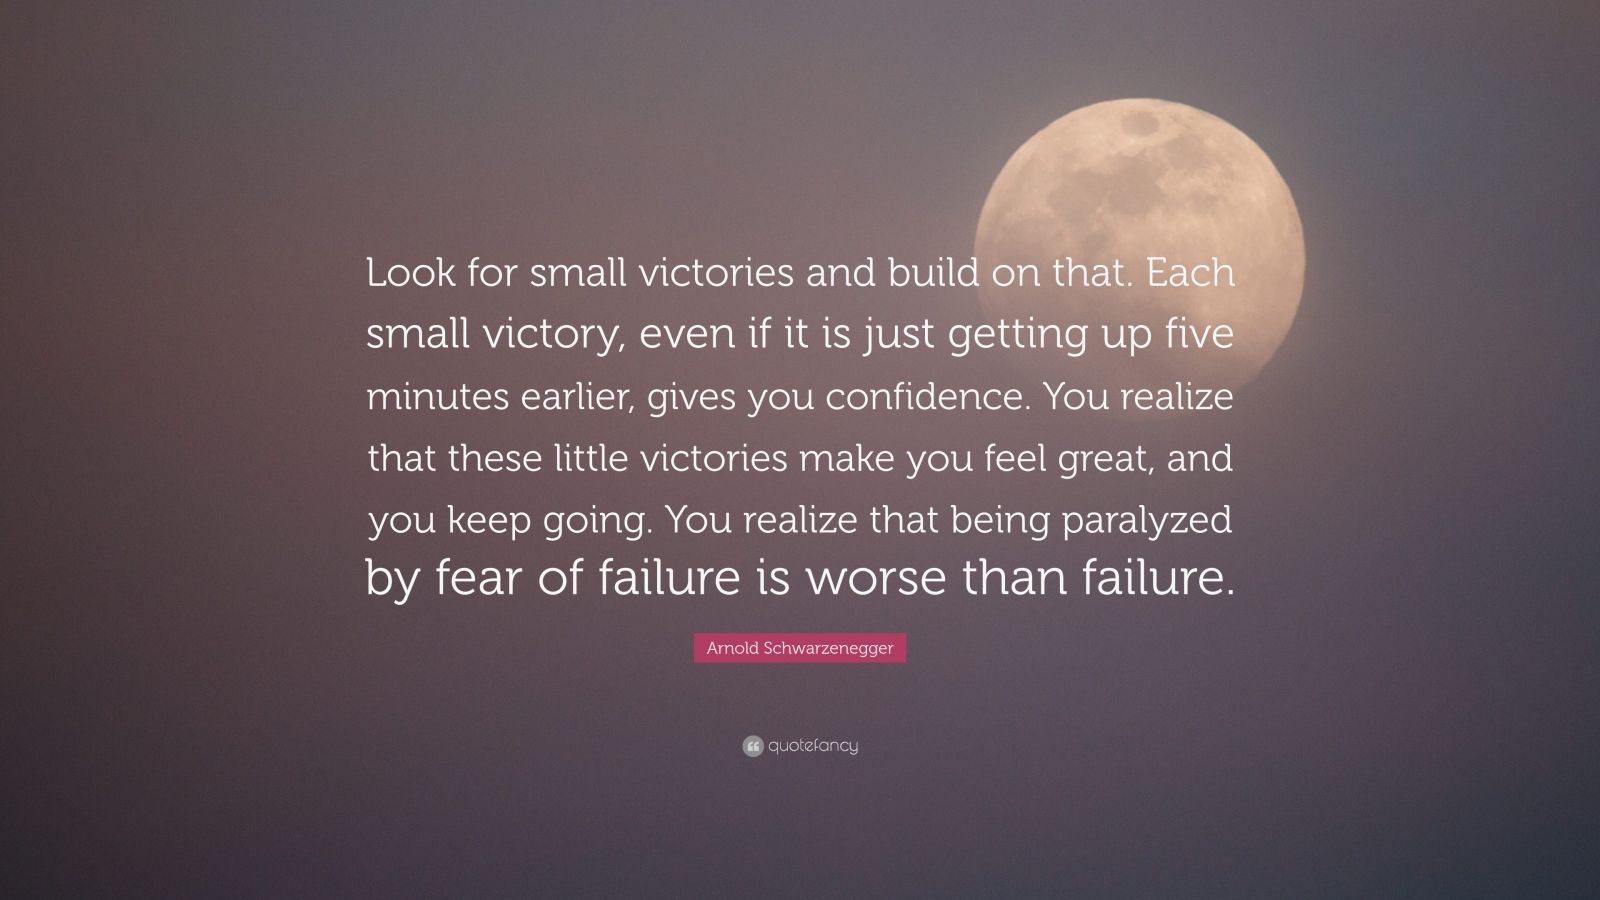 Arnold Schwarzenegger Quote: “Look for small victories and build on